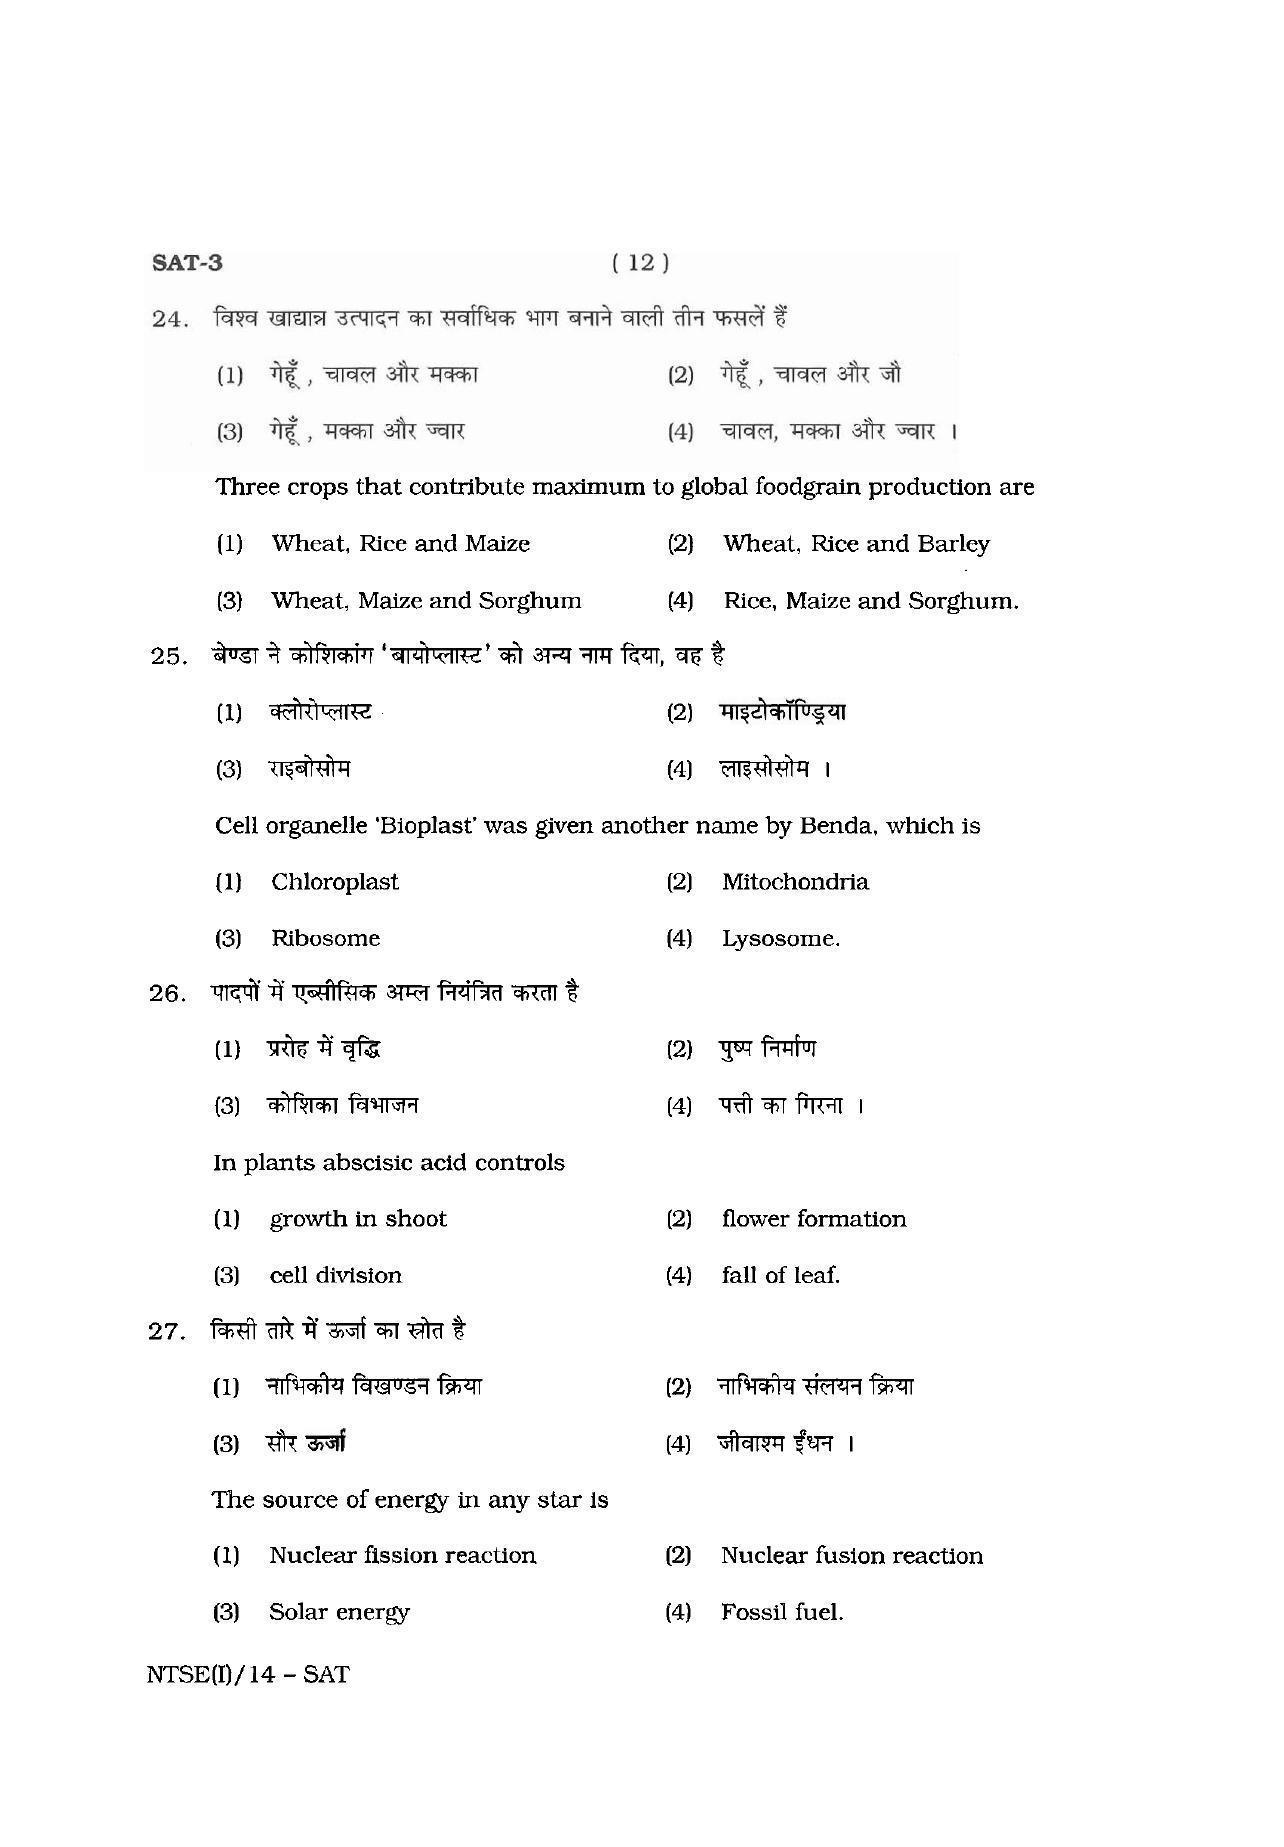 NTSE 2014 (Stage II) SAT Question Paper - Page 12